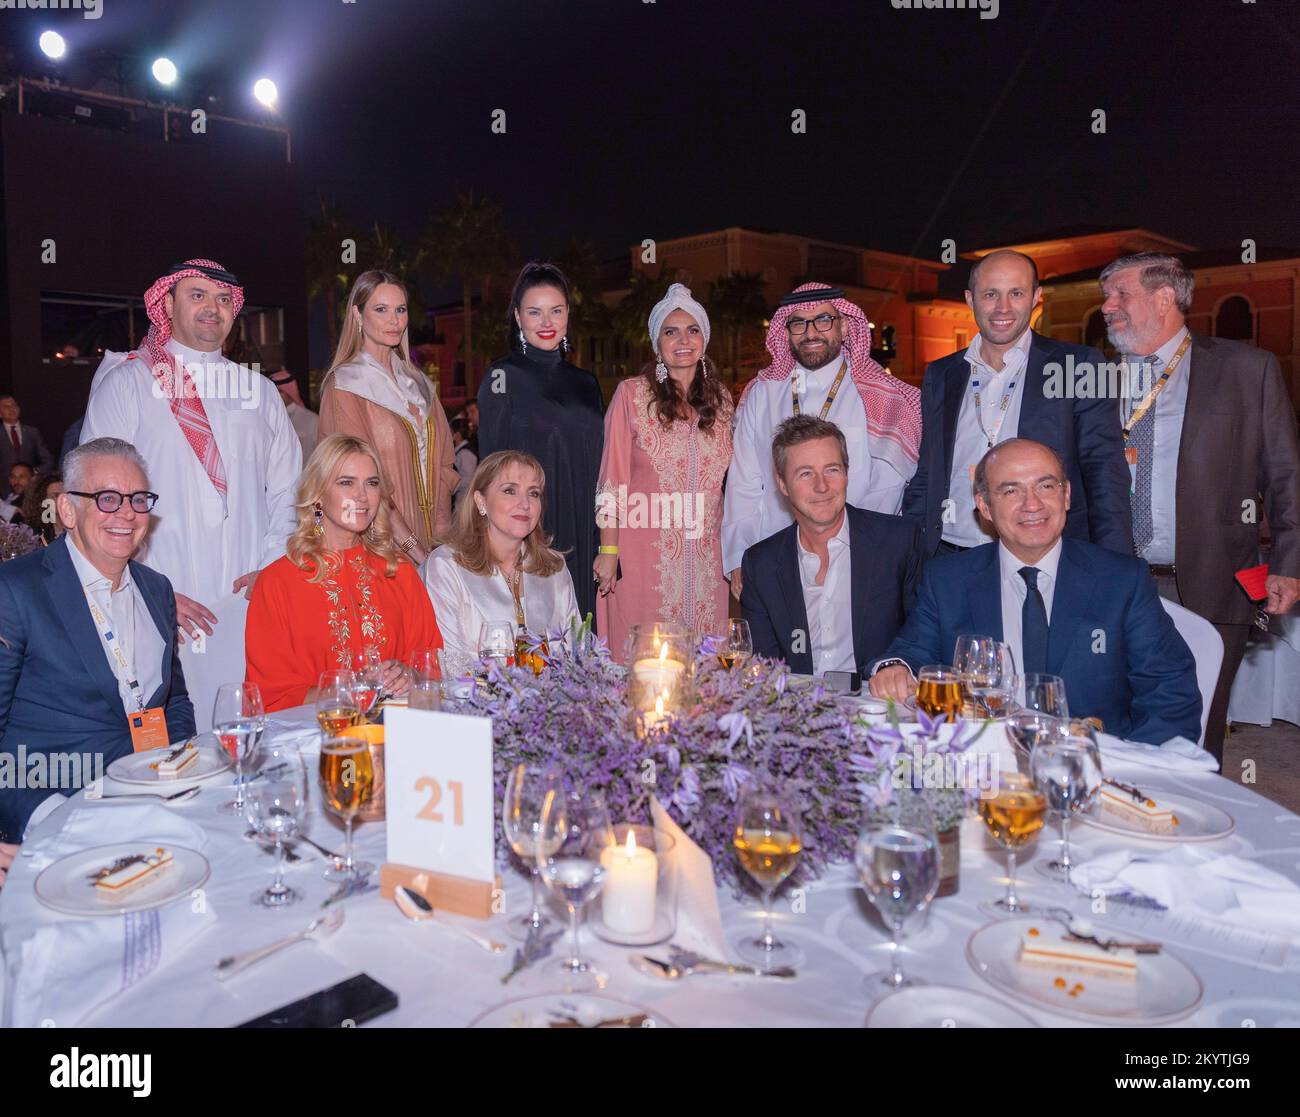 Valeria Mazza, Elle Macpherson, Gloria Guevara, Adriana Lima, Sandra García-Sanjuán, Edward Norton y Felipe Calderón con miembros del WTTC at World Tourism Summit held in Riyadh. Host of the World Travel and Tourism Council (WTTC) World Summit, Saudi Arabia has pulled off the biggest event in its history, breaking all records and drawing more international business leaders and foreign government delegations than ever before. 2,500 participants traveled to Riyadh to attend the “Travel for a better future” summit. Friday December 2, 2022 POOL/AVORY CELEBRITY ACCESS/Cordon Press Cordon Press Stock Photo